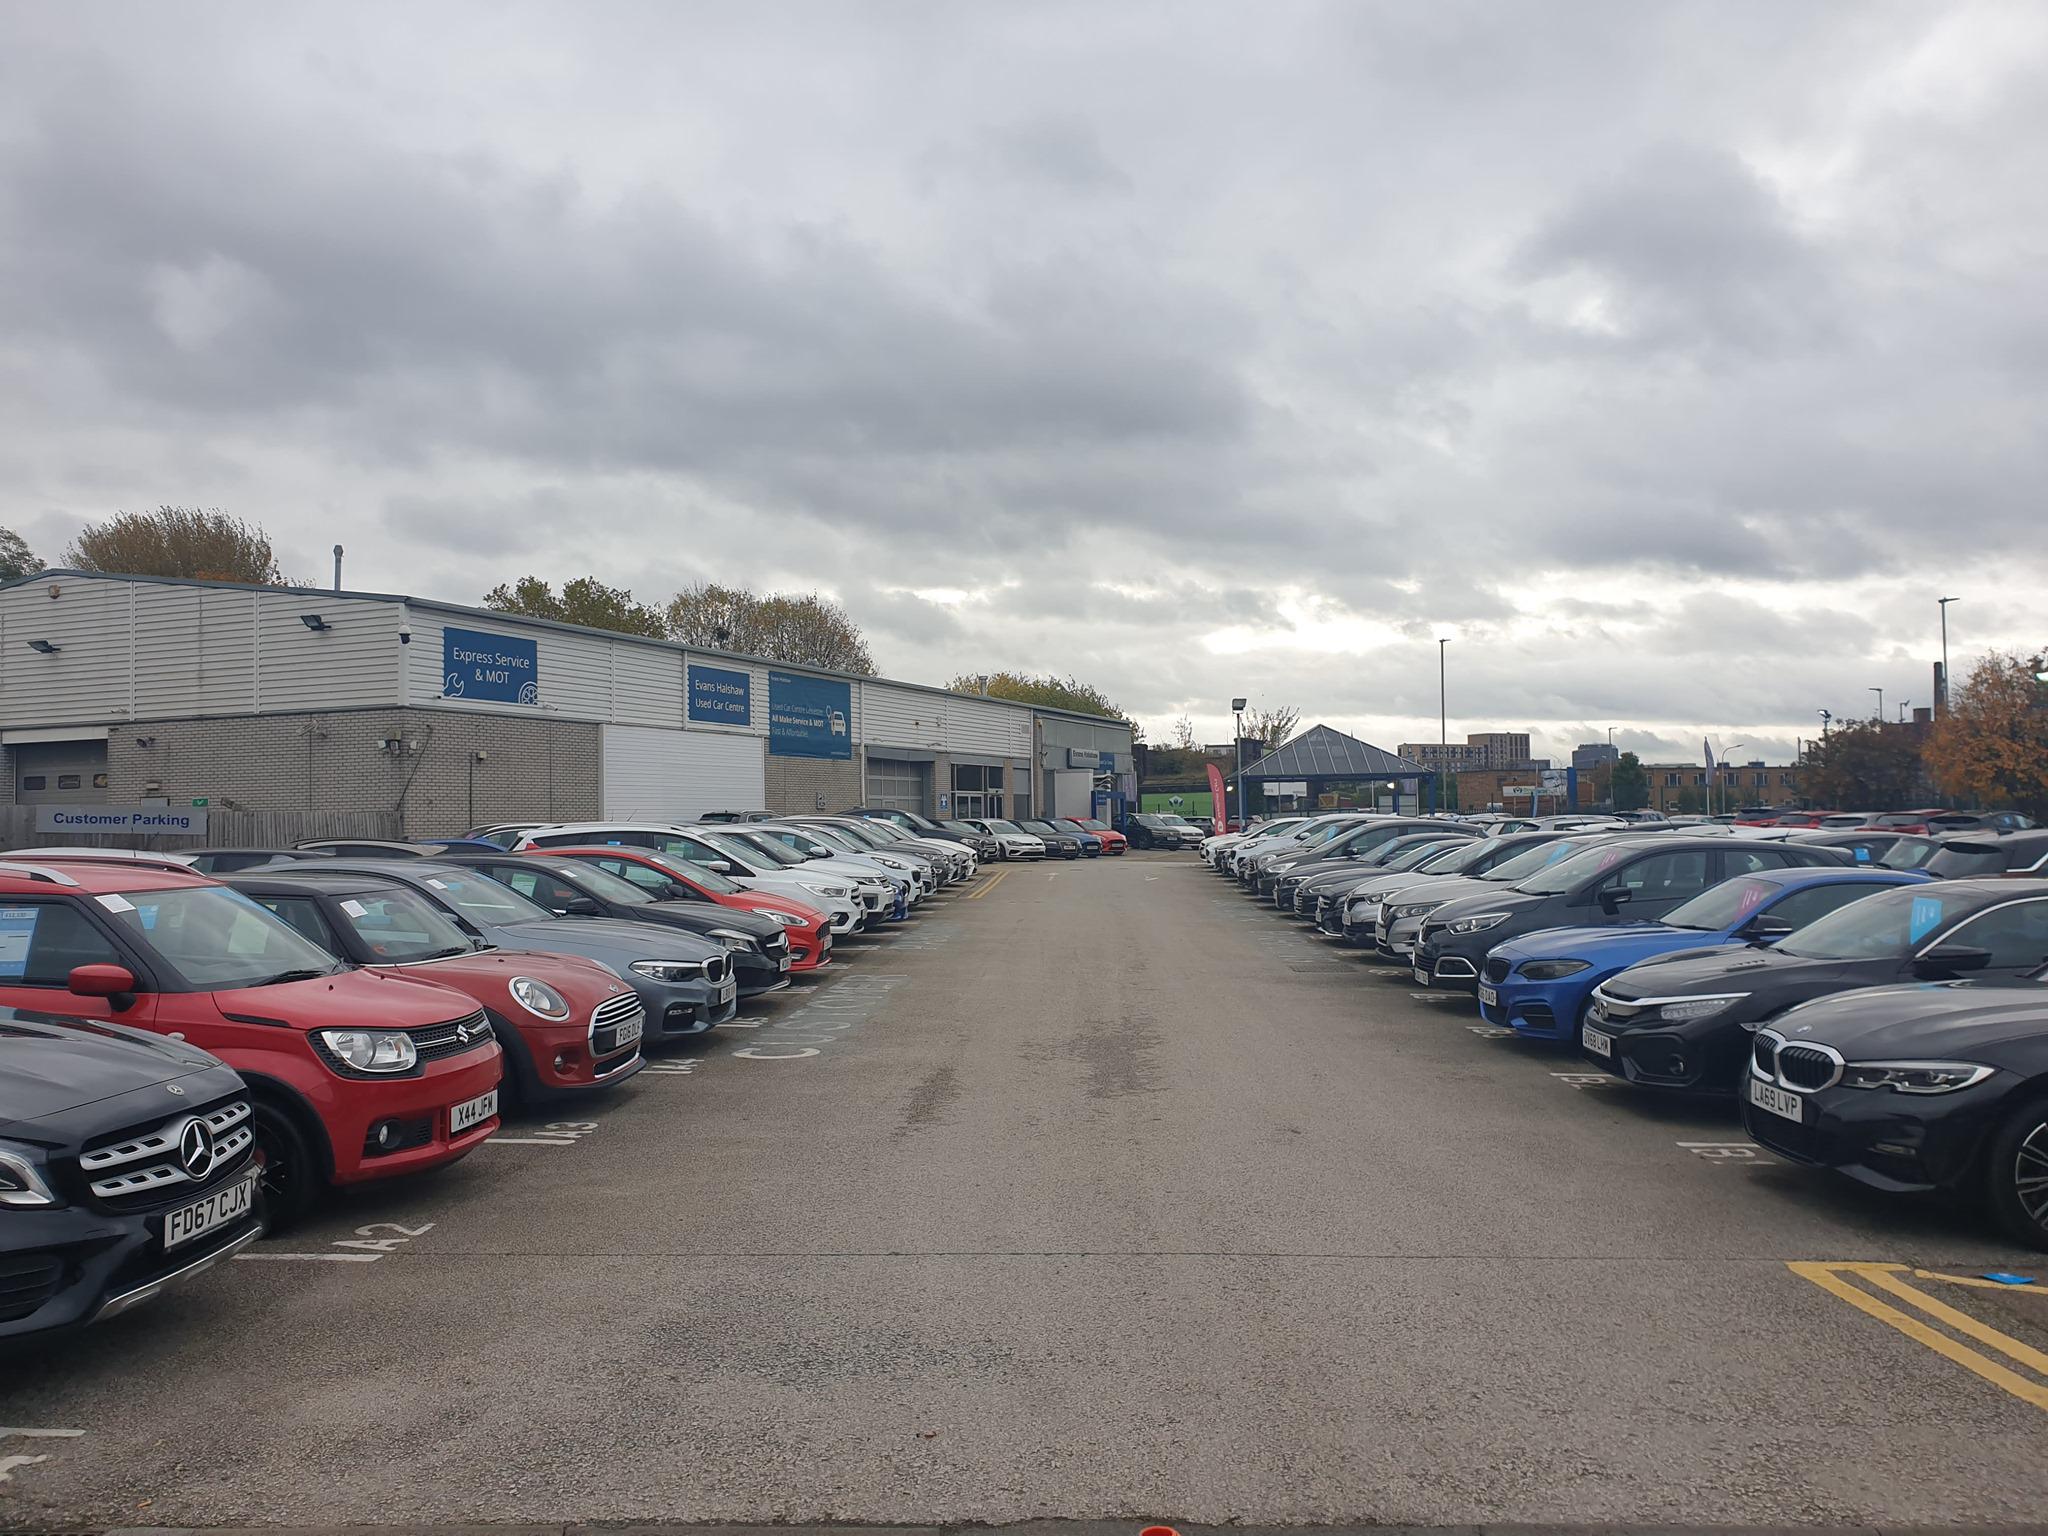 Images Evans Halshaw Used Car Centre Leicester